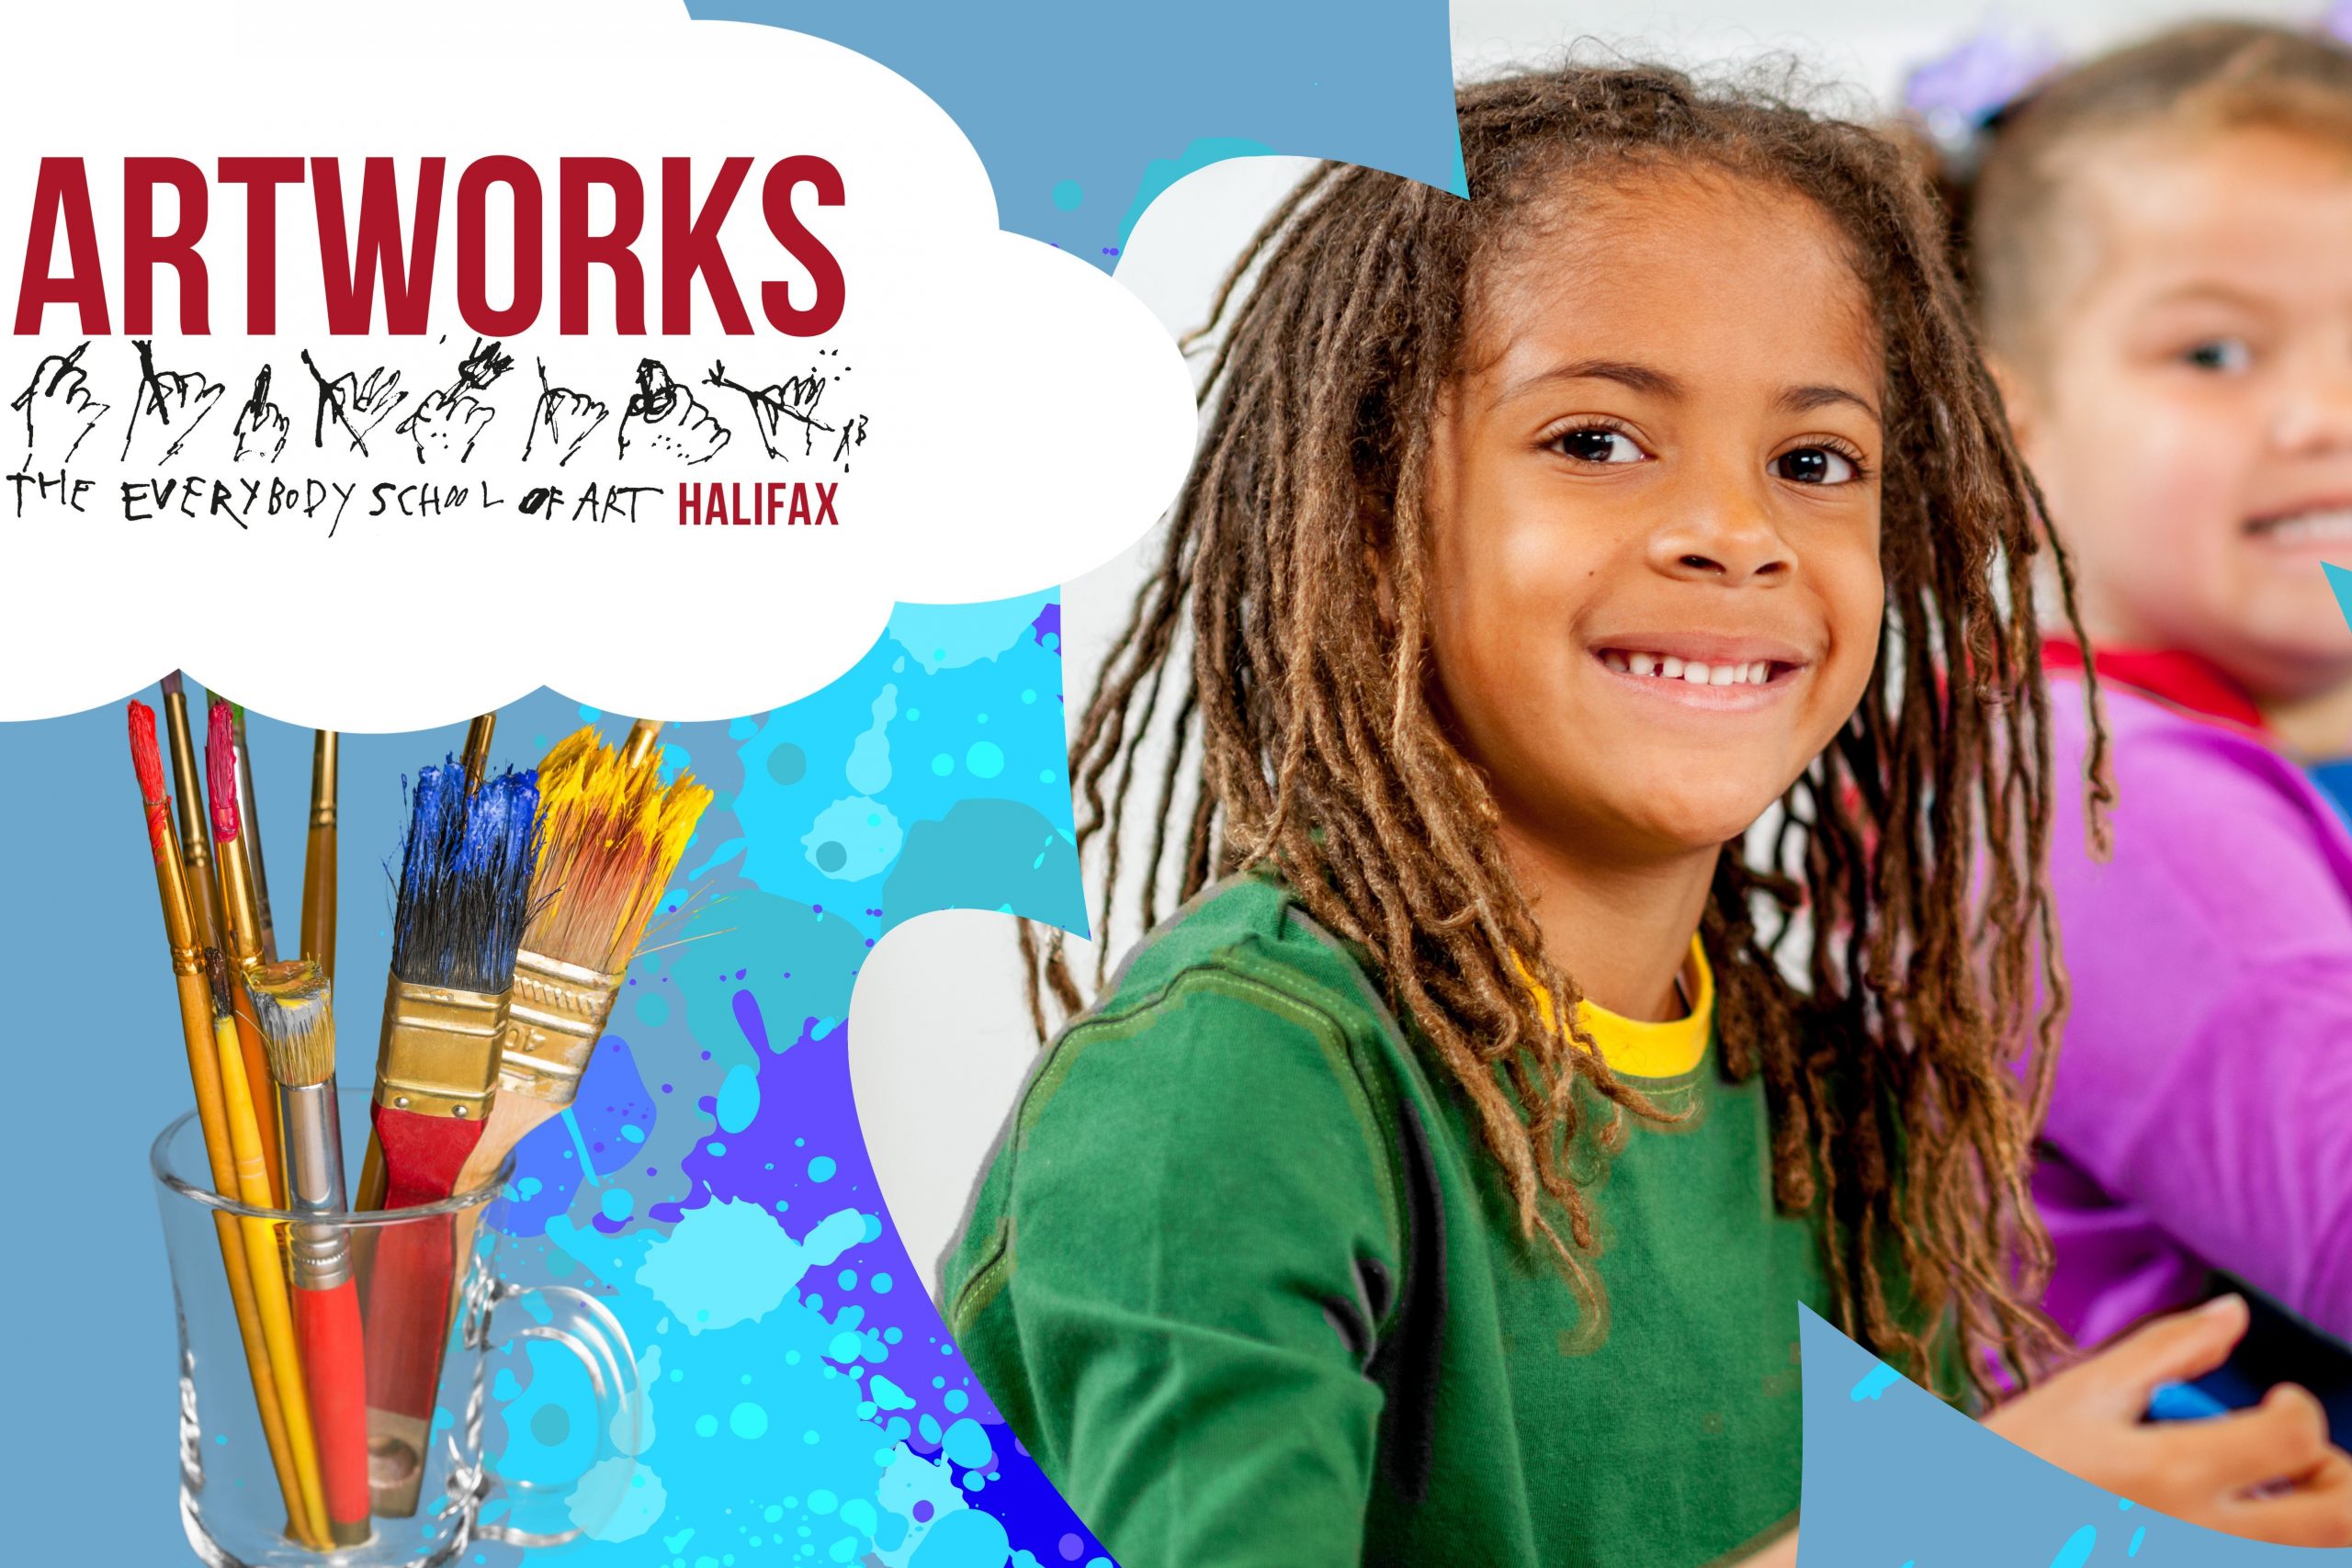 A small boy smiles from a paint-splattered background. A set of paintbrushes are to his left. The logo for Artworks is in the upper left hand corner.